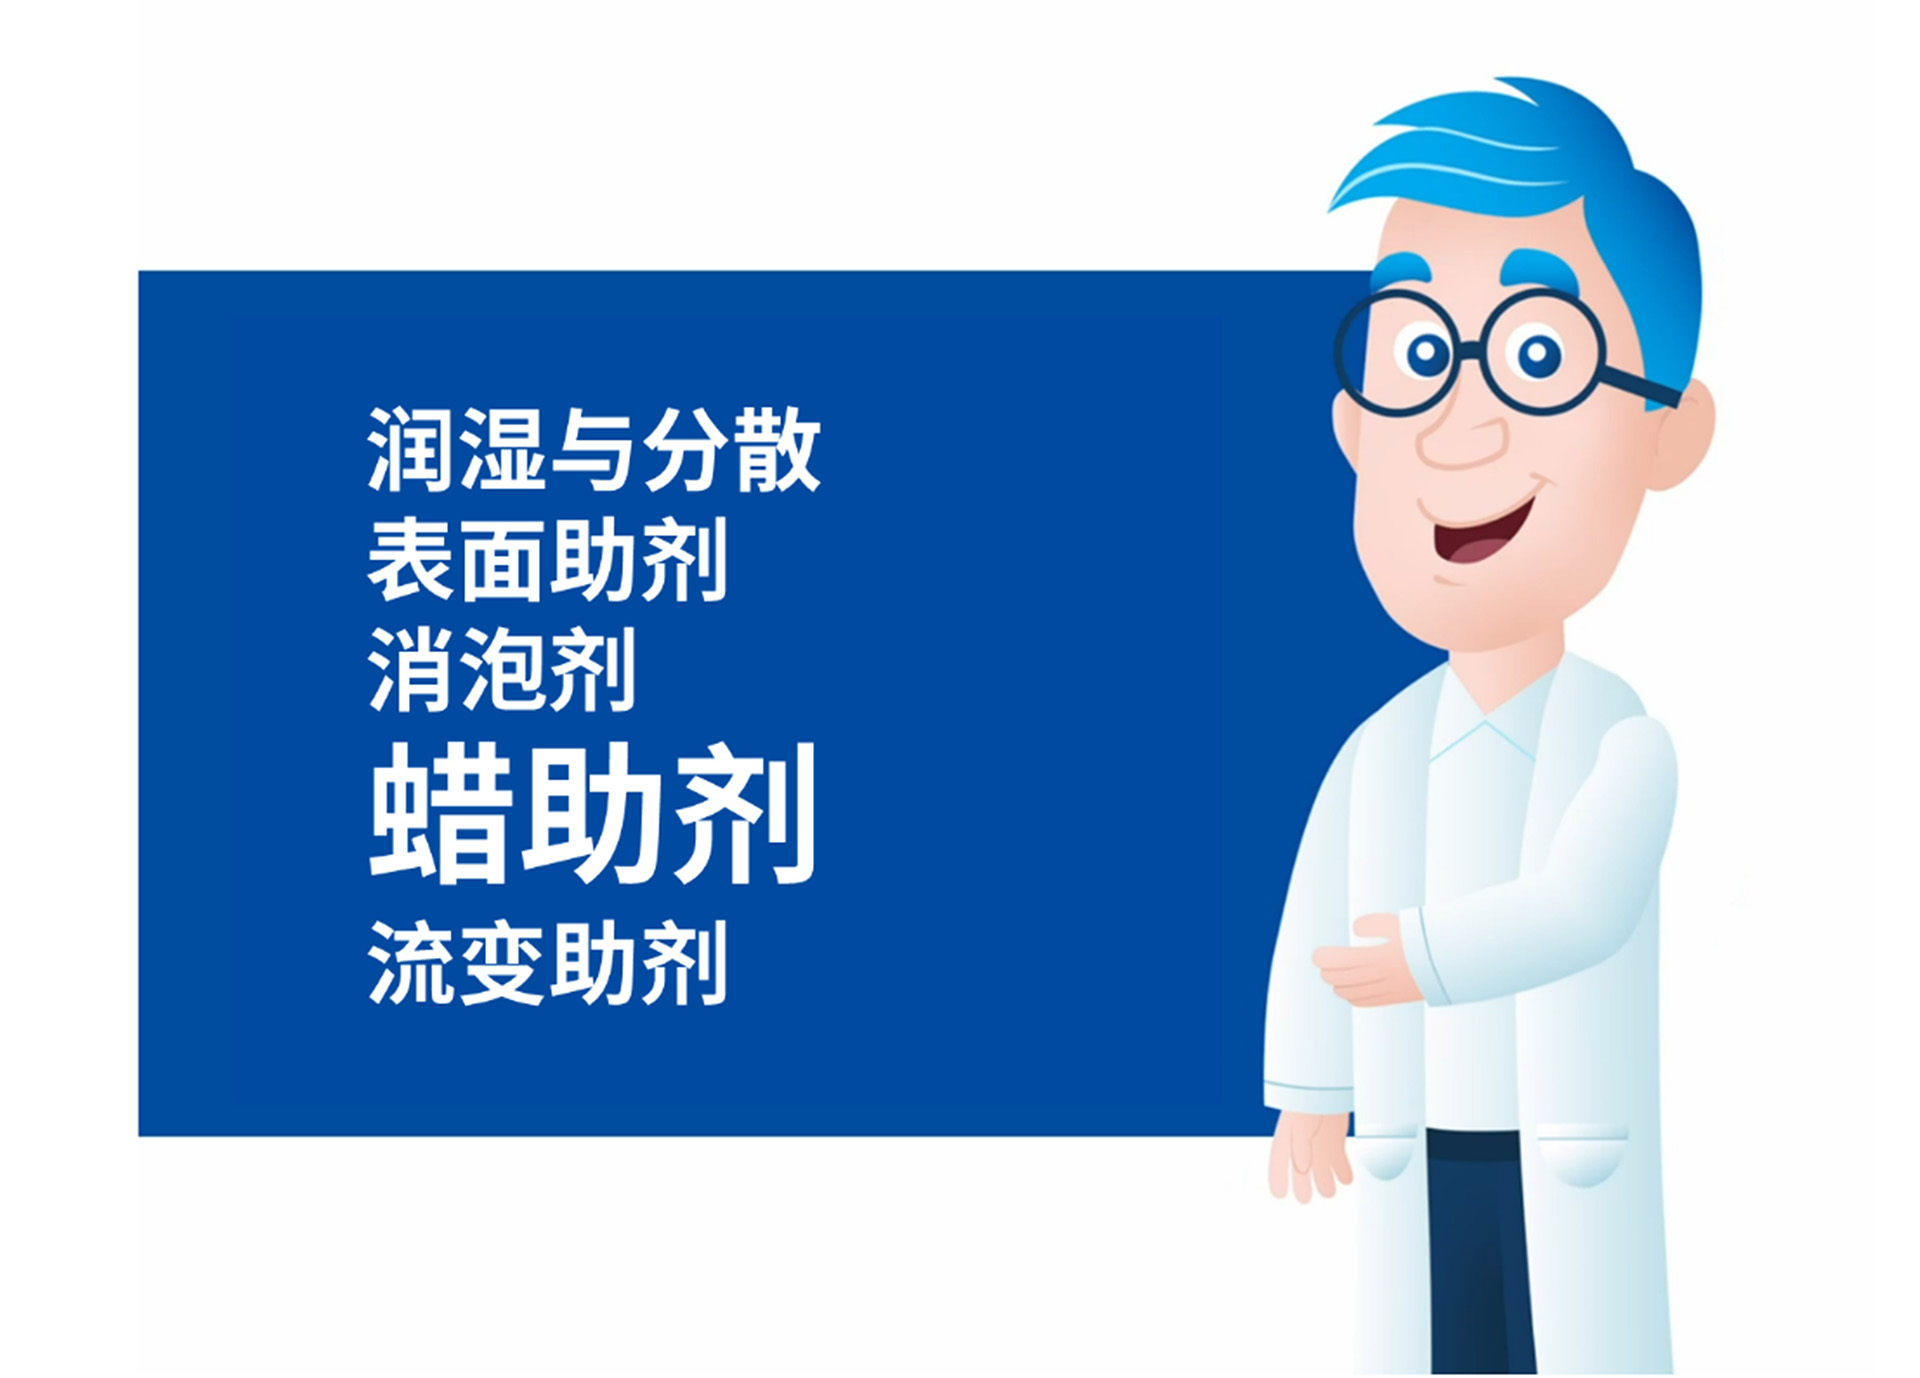 [Translate to Chinese:] Dr. Addys Open Class Wax Additives